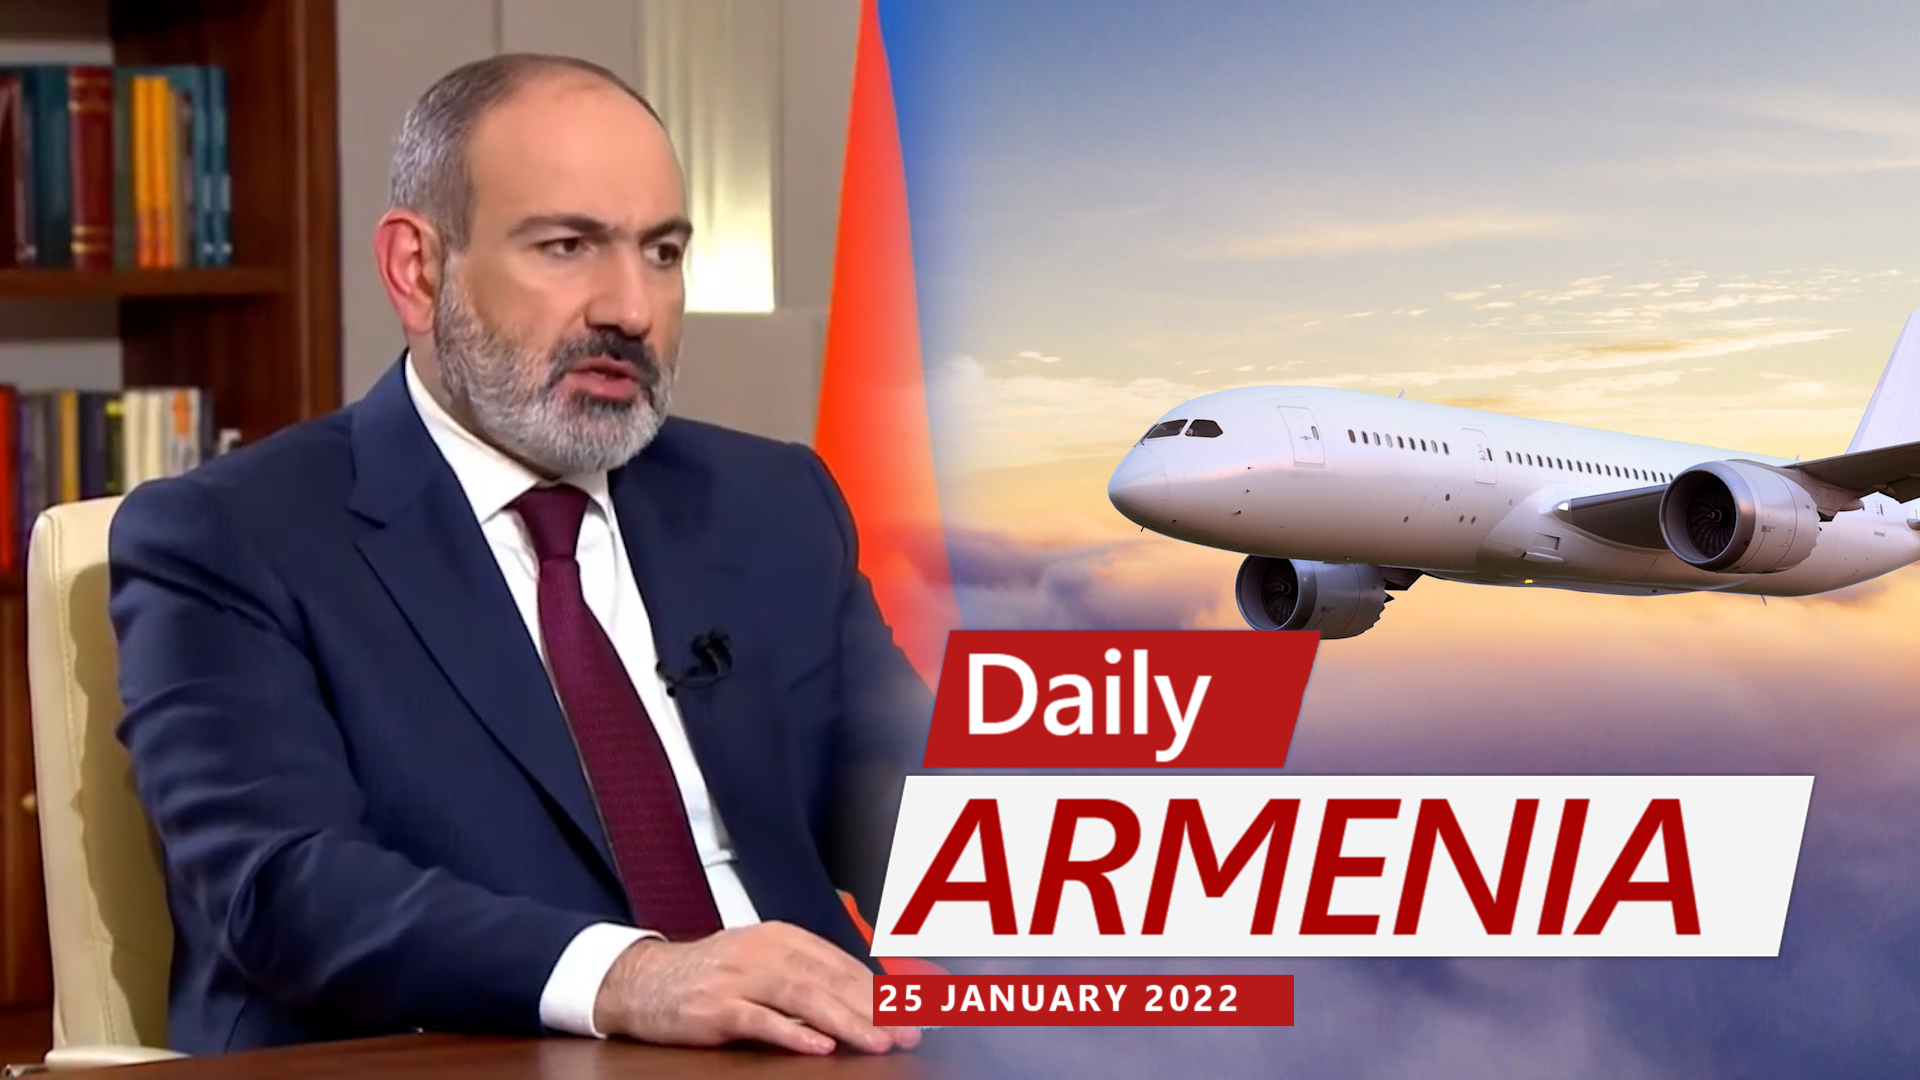 “There must be political harmony between Armenia’s president and the government”, Pashinyan